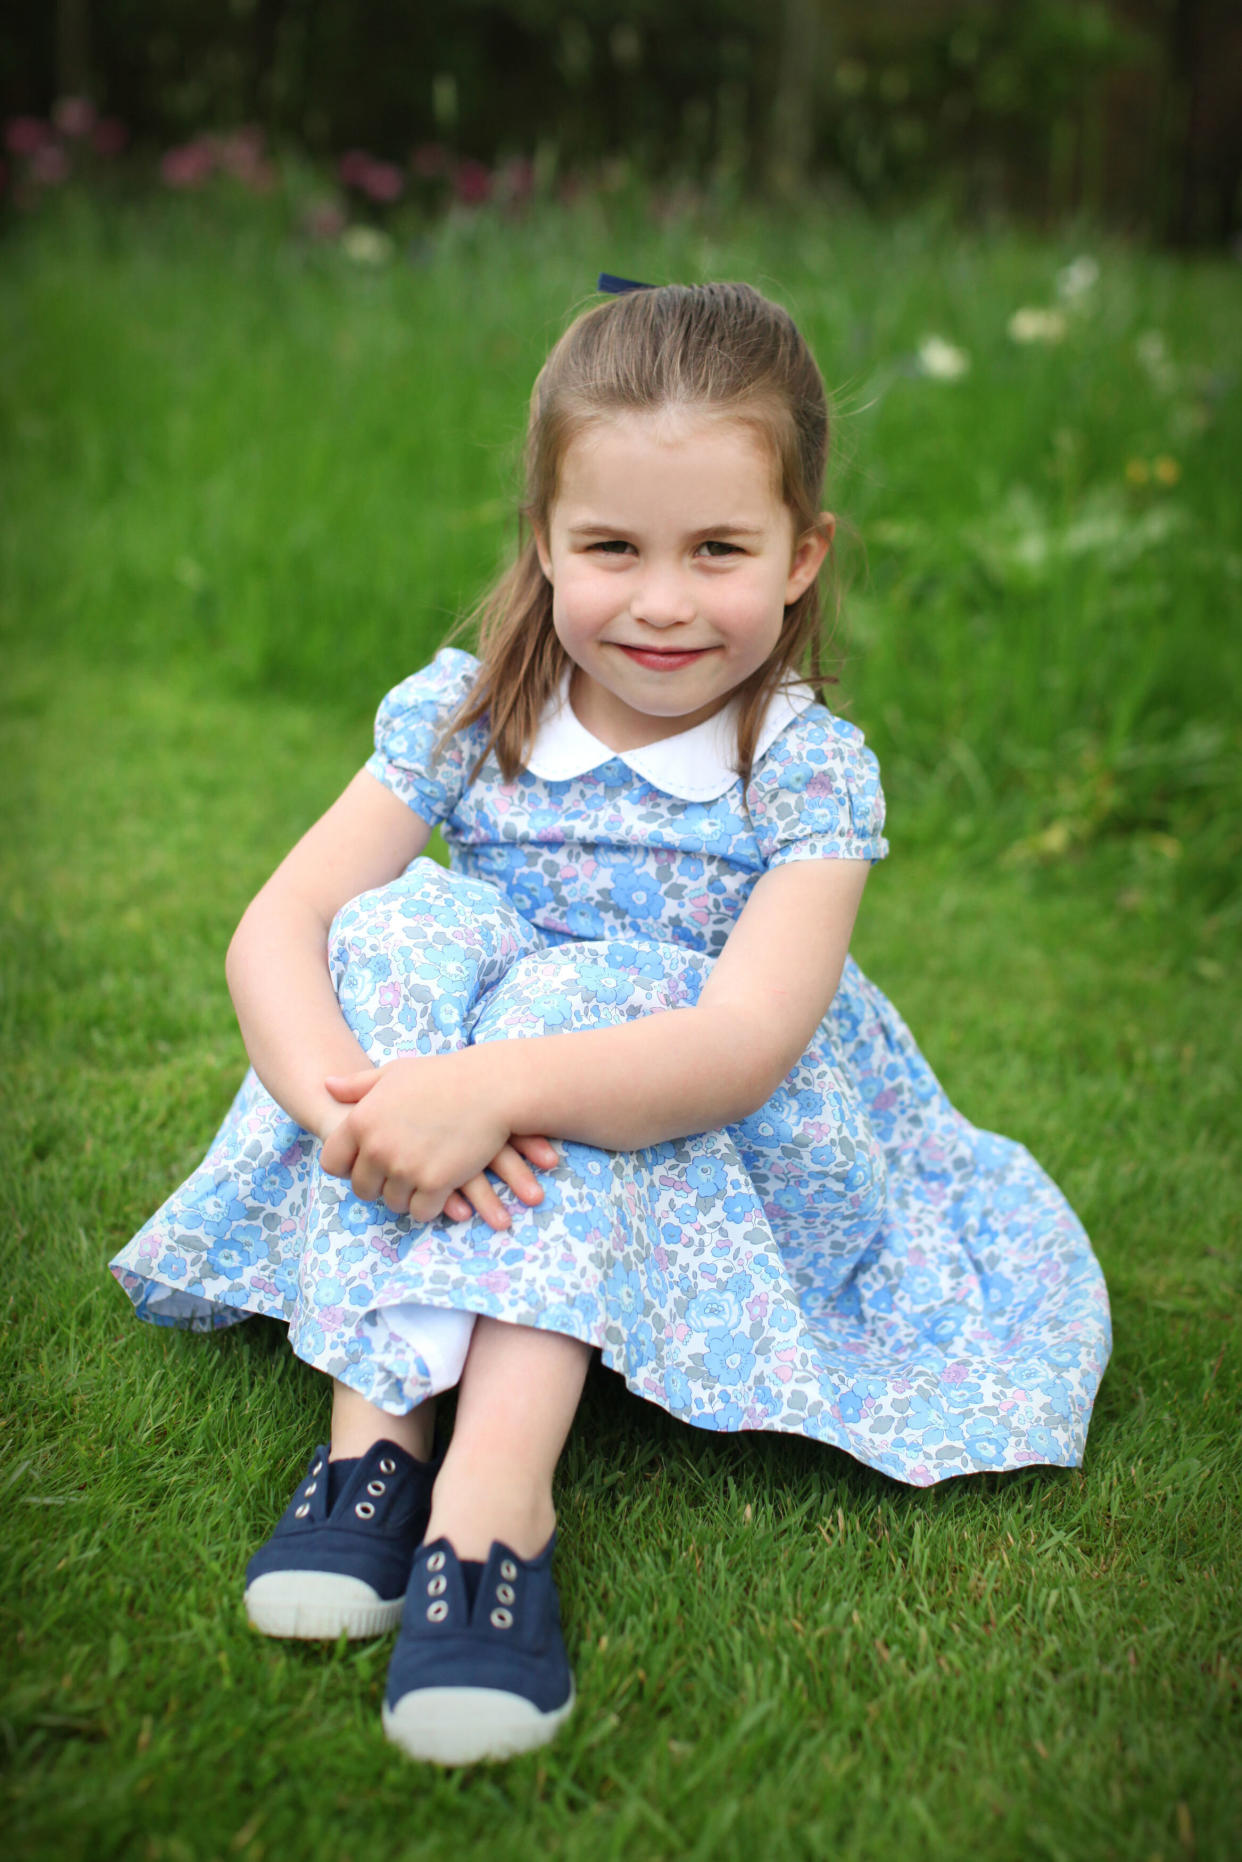 Kensington Palace release three new photos of Princess Charlotte for her fourth birthday. Photo: Getty Images